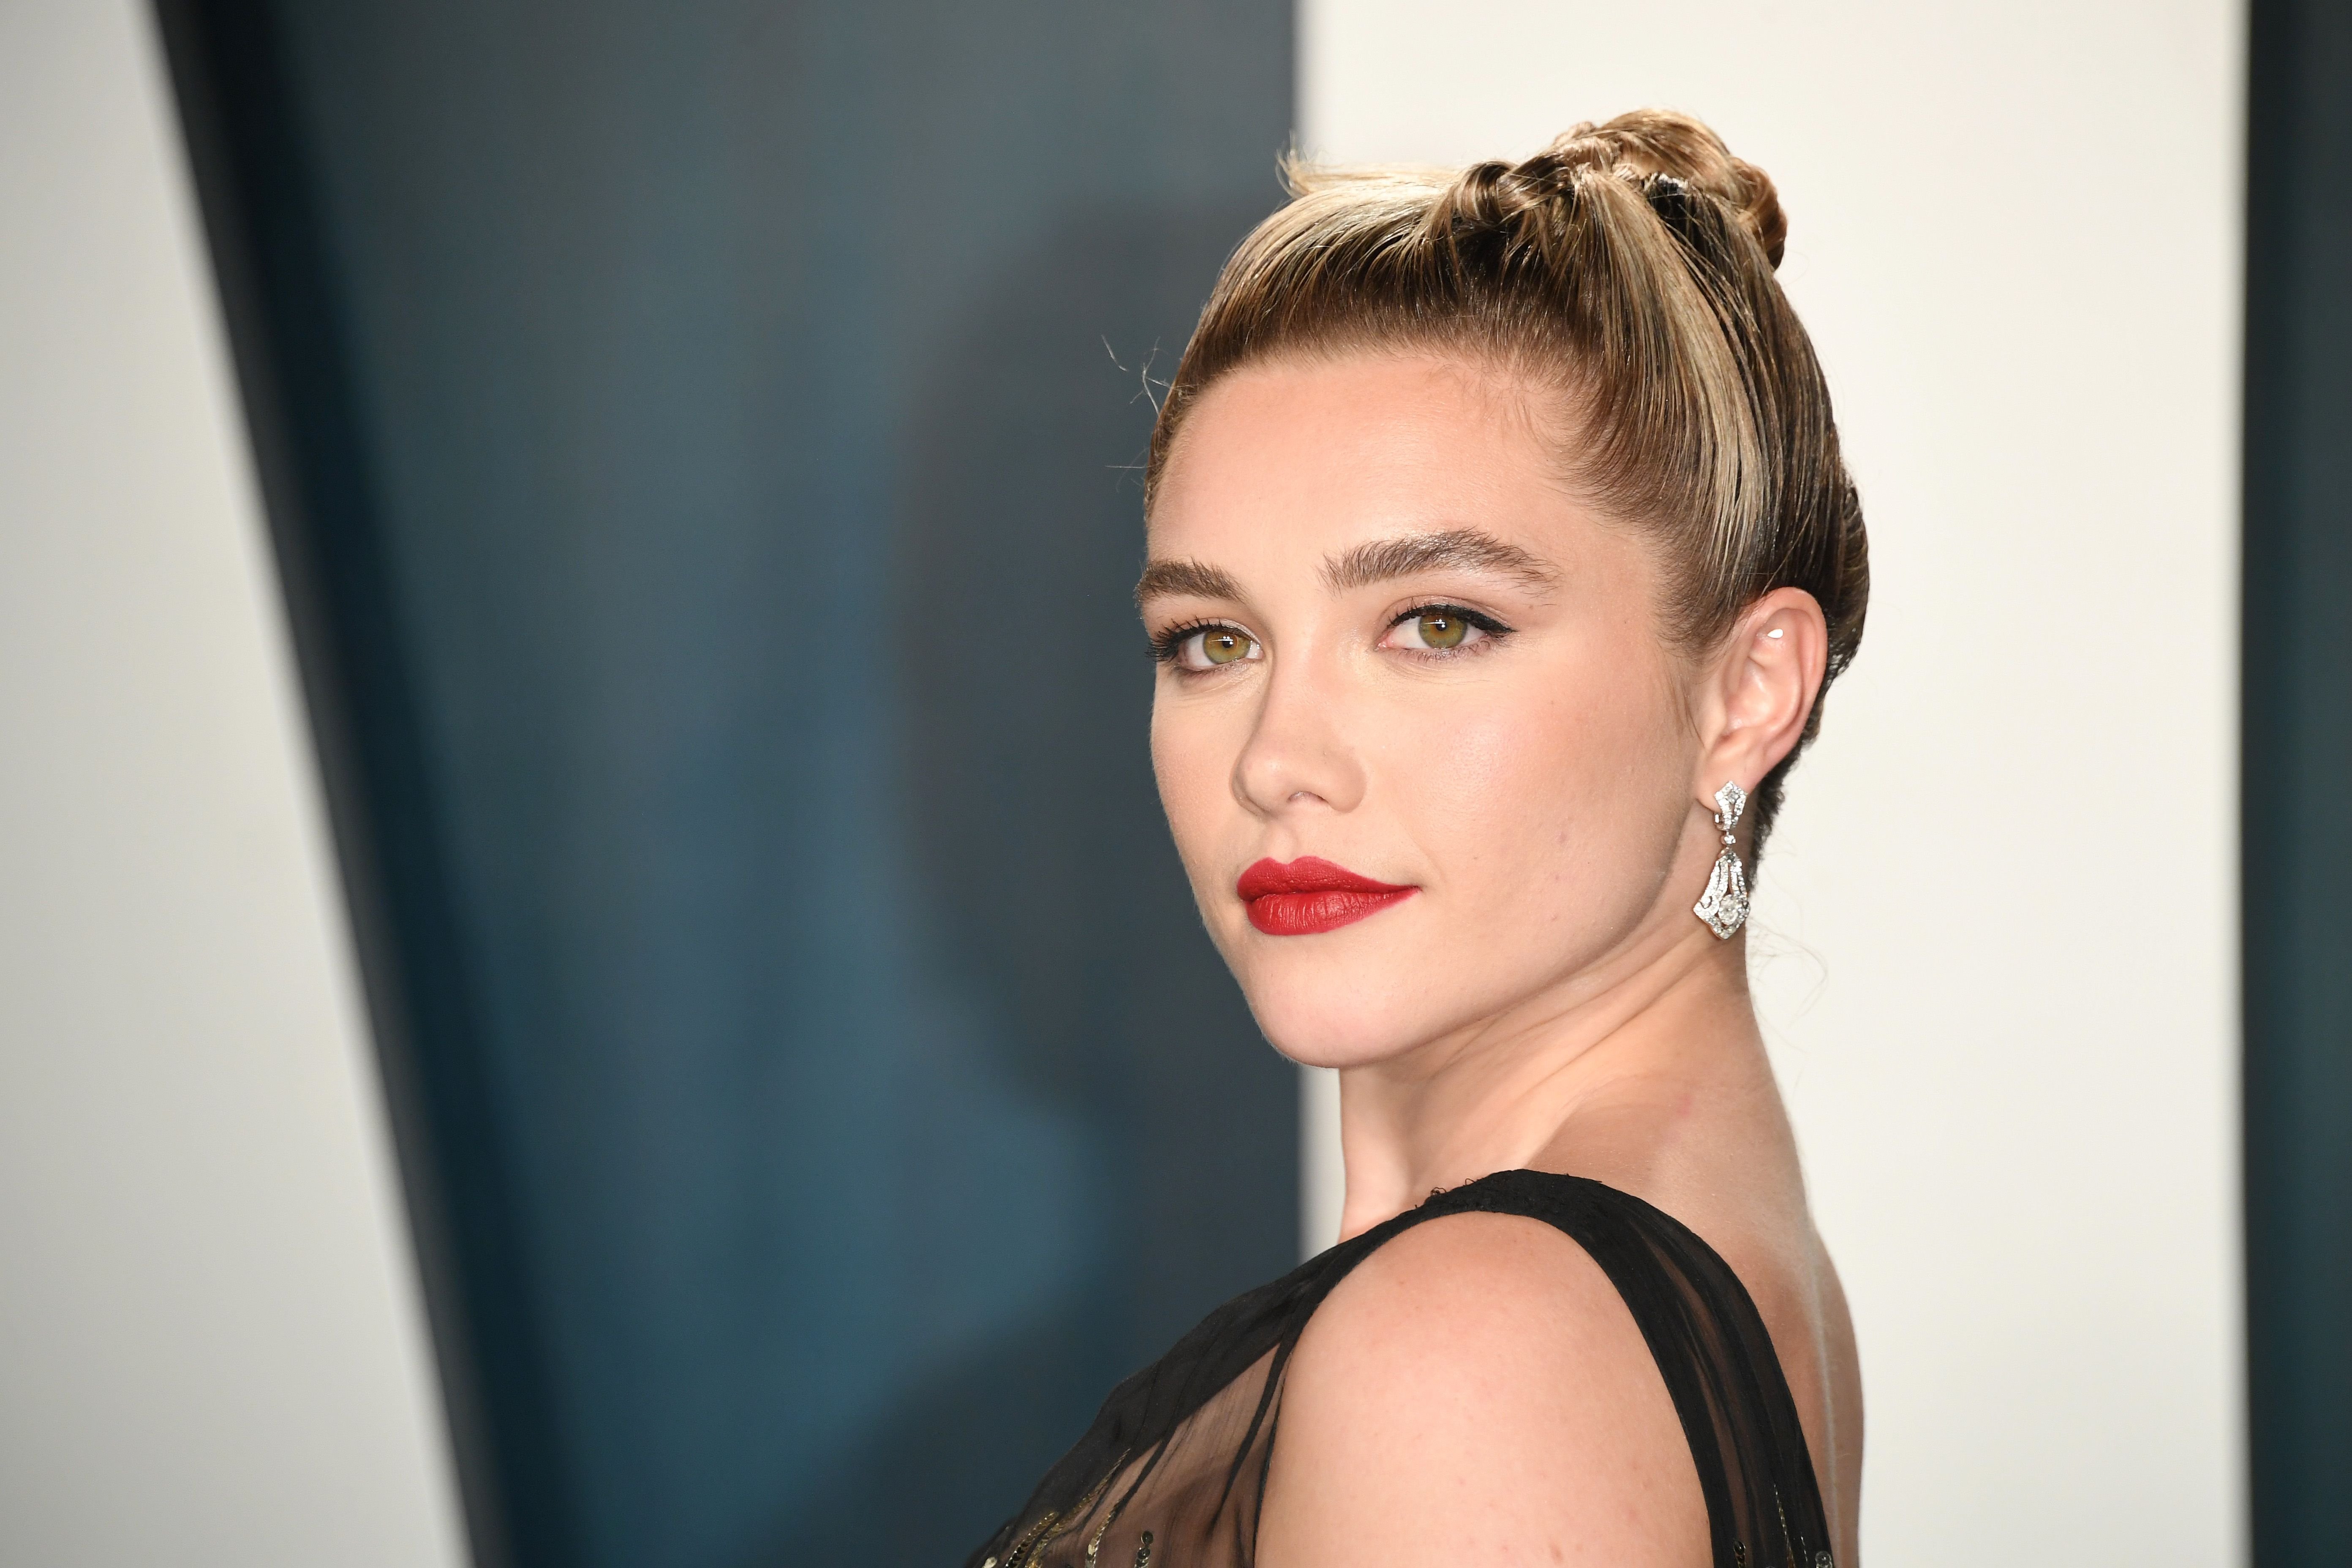 Florence Pugh at the 2020 Vanity Fair Oscar party on February 09, 2020 in Beverly Hills, California | Photo: Getty Images